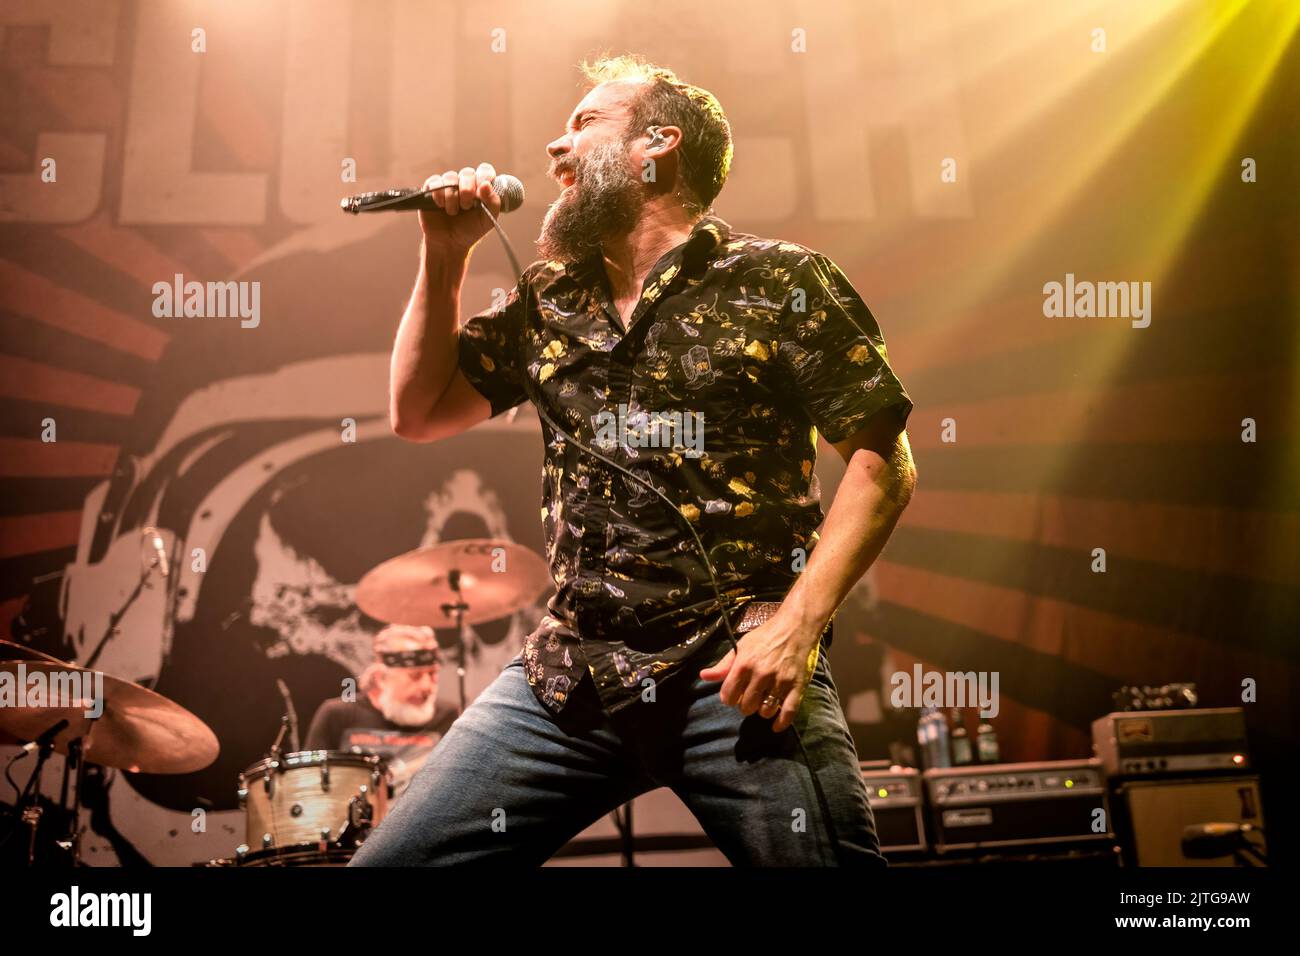 Oslo, Norway. 24th, August 2022. The American rock band Clutch performs a live concert at Sentrum Scene in Oslo. Here singer Neil Fallon is seen live on stage. (Photo credit: Gonzales Photo - Terje Dokken). Stock Photo